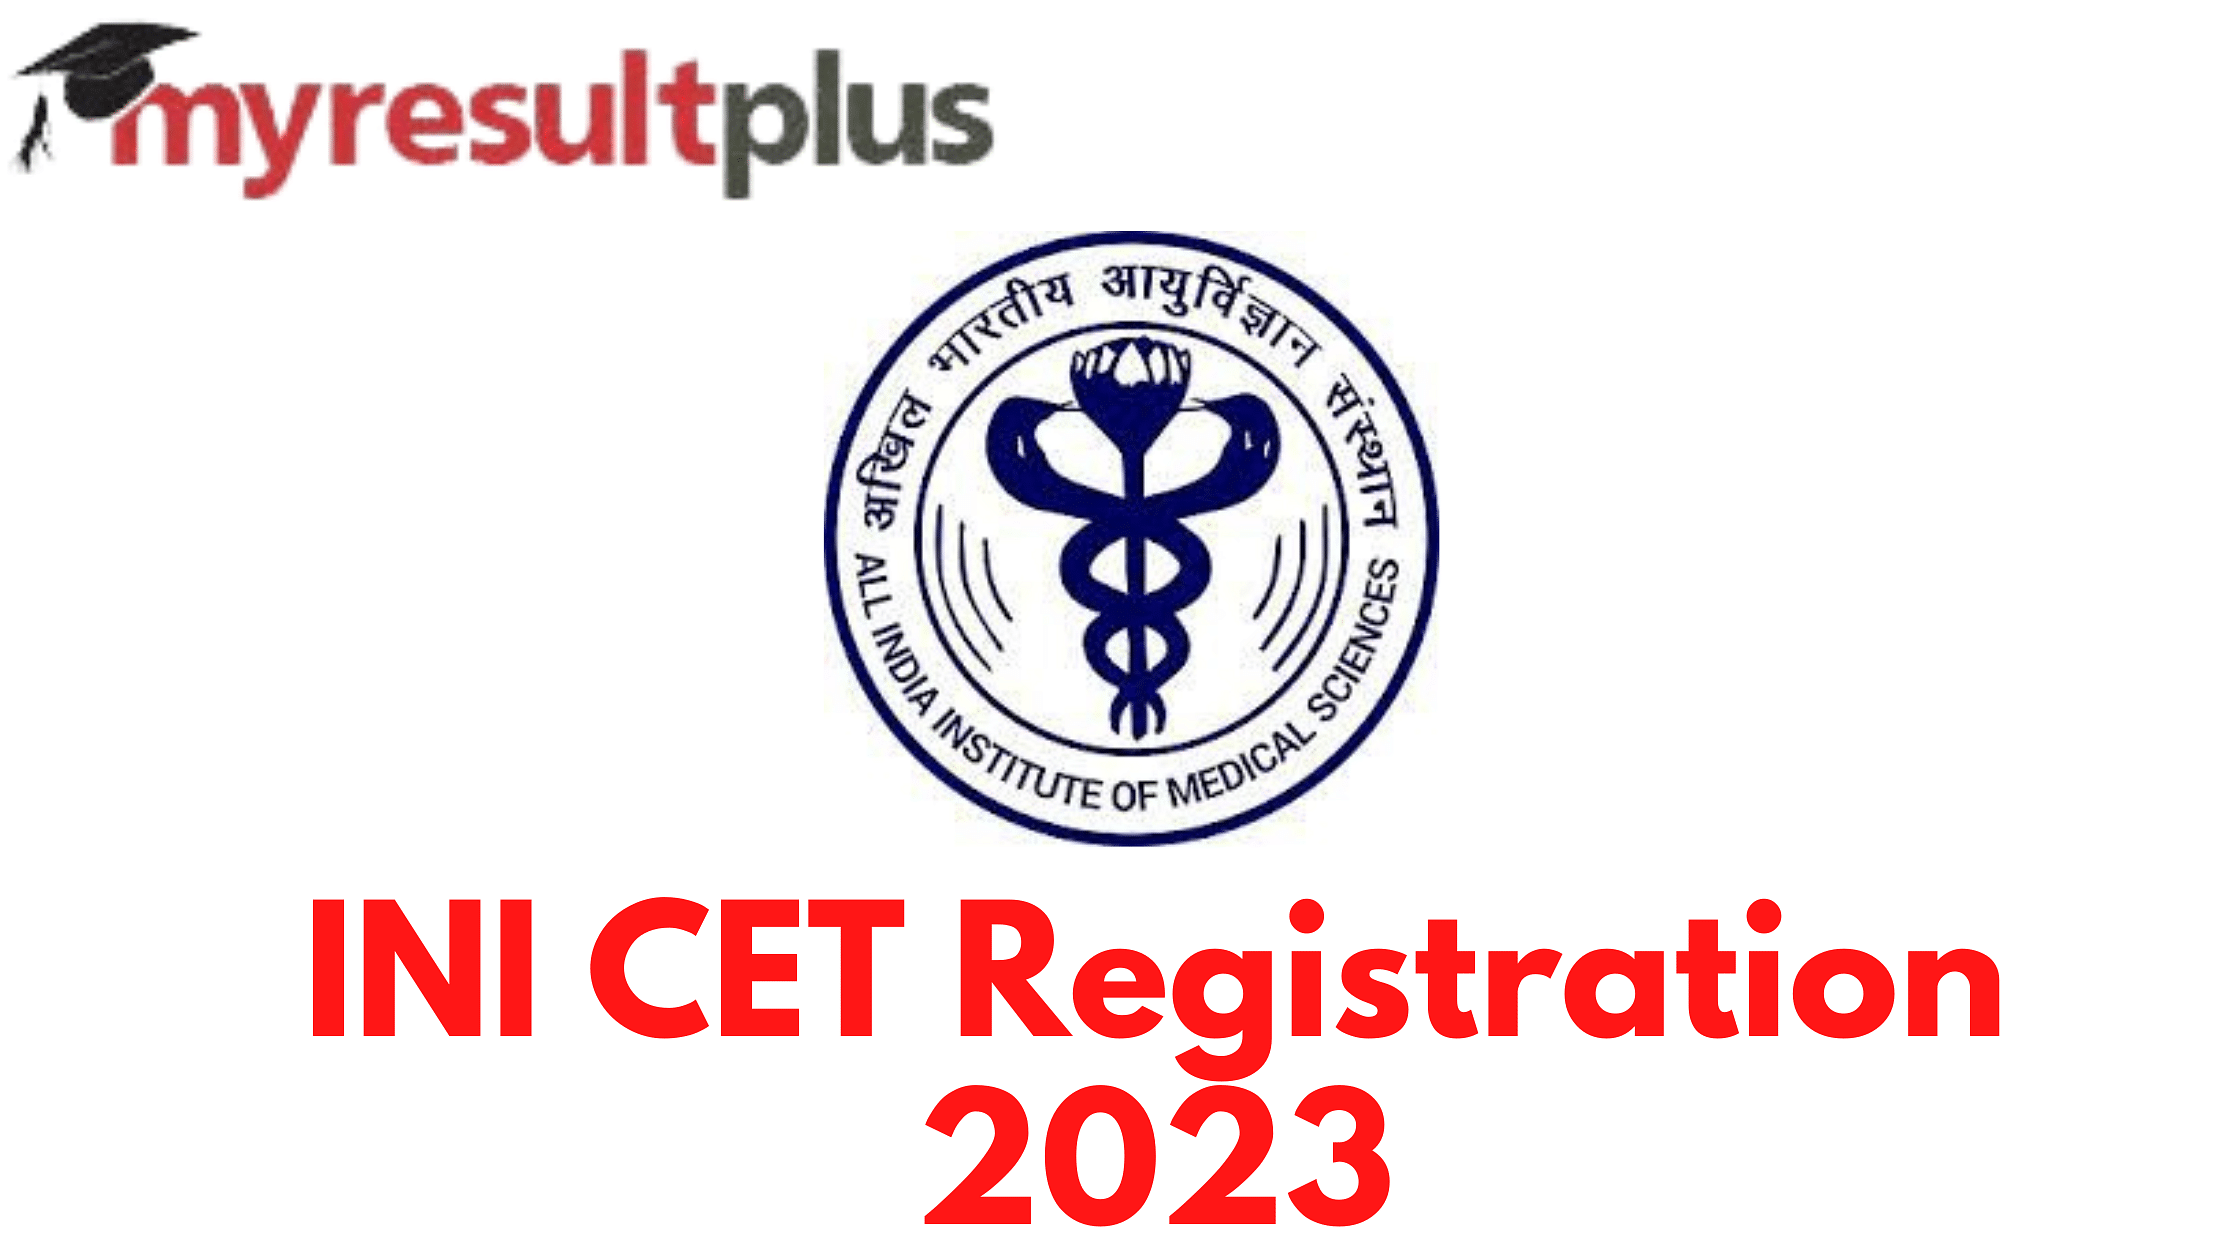 Ini Cet 2023 Registration Commencement Date September 5, Check Complete